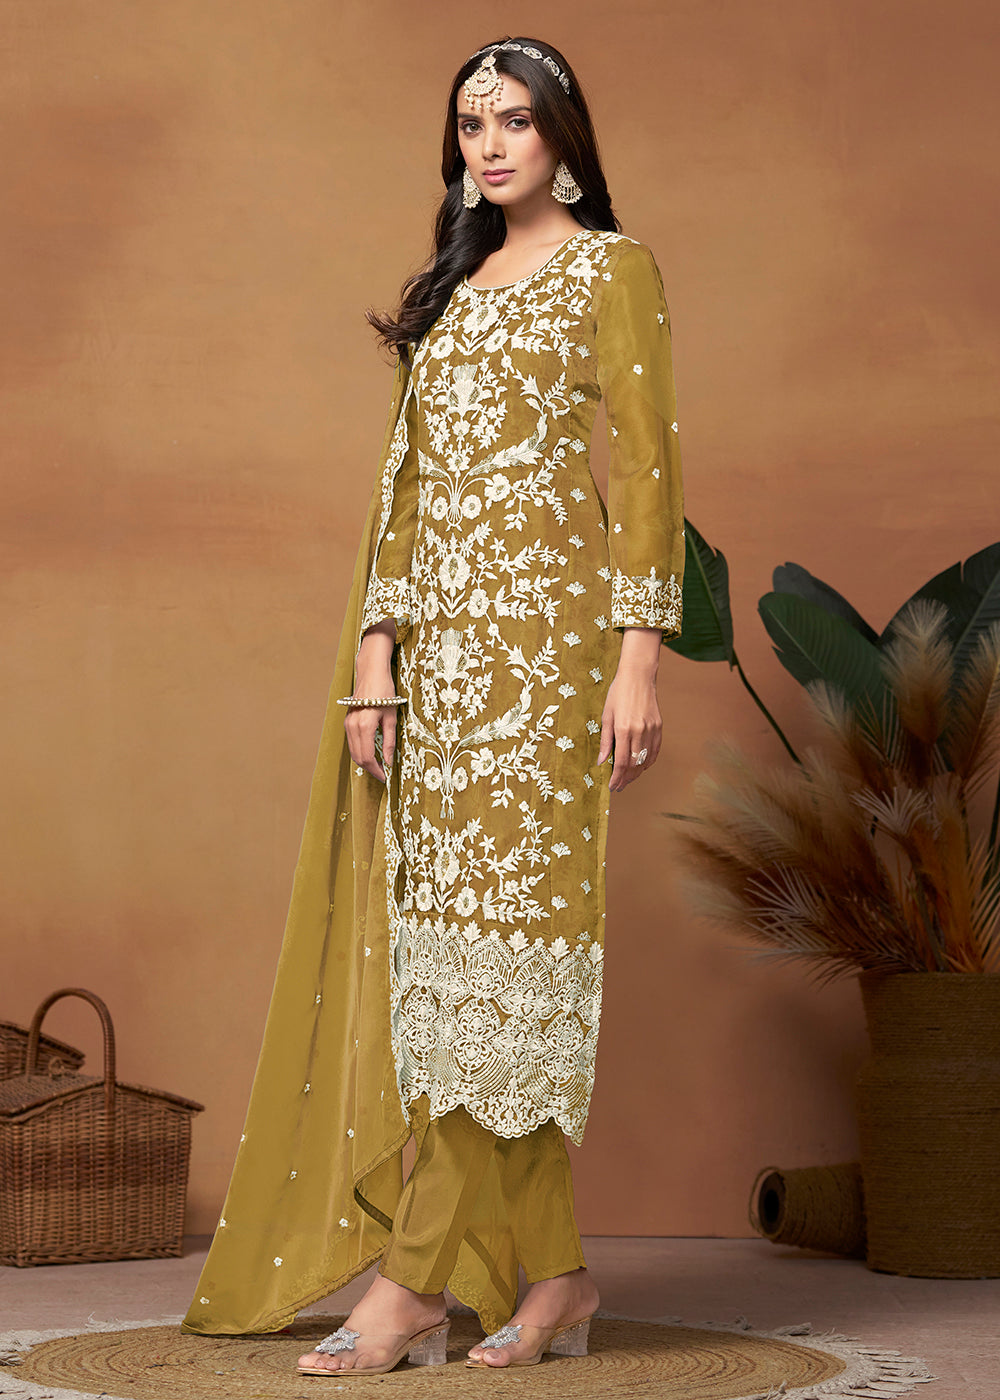 Buy Now Amazing Mustard Organza Embroidered Designer Salwar Suit Online in USA, UK, Canada, Germany, Australia & Worldwide at Empress Clothing. 